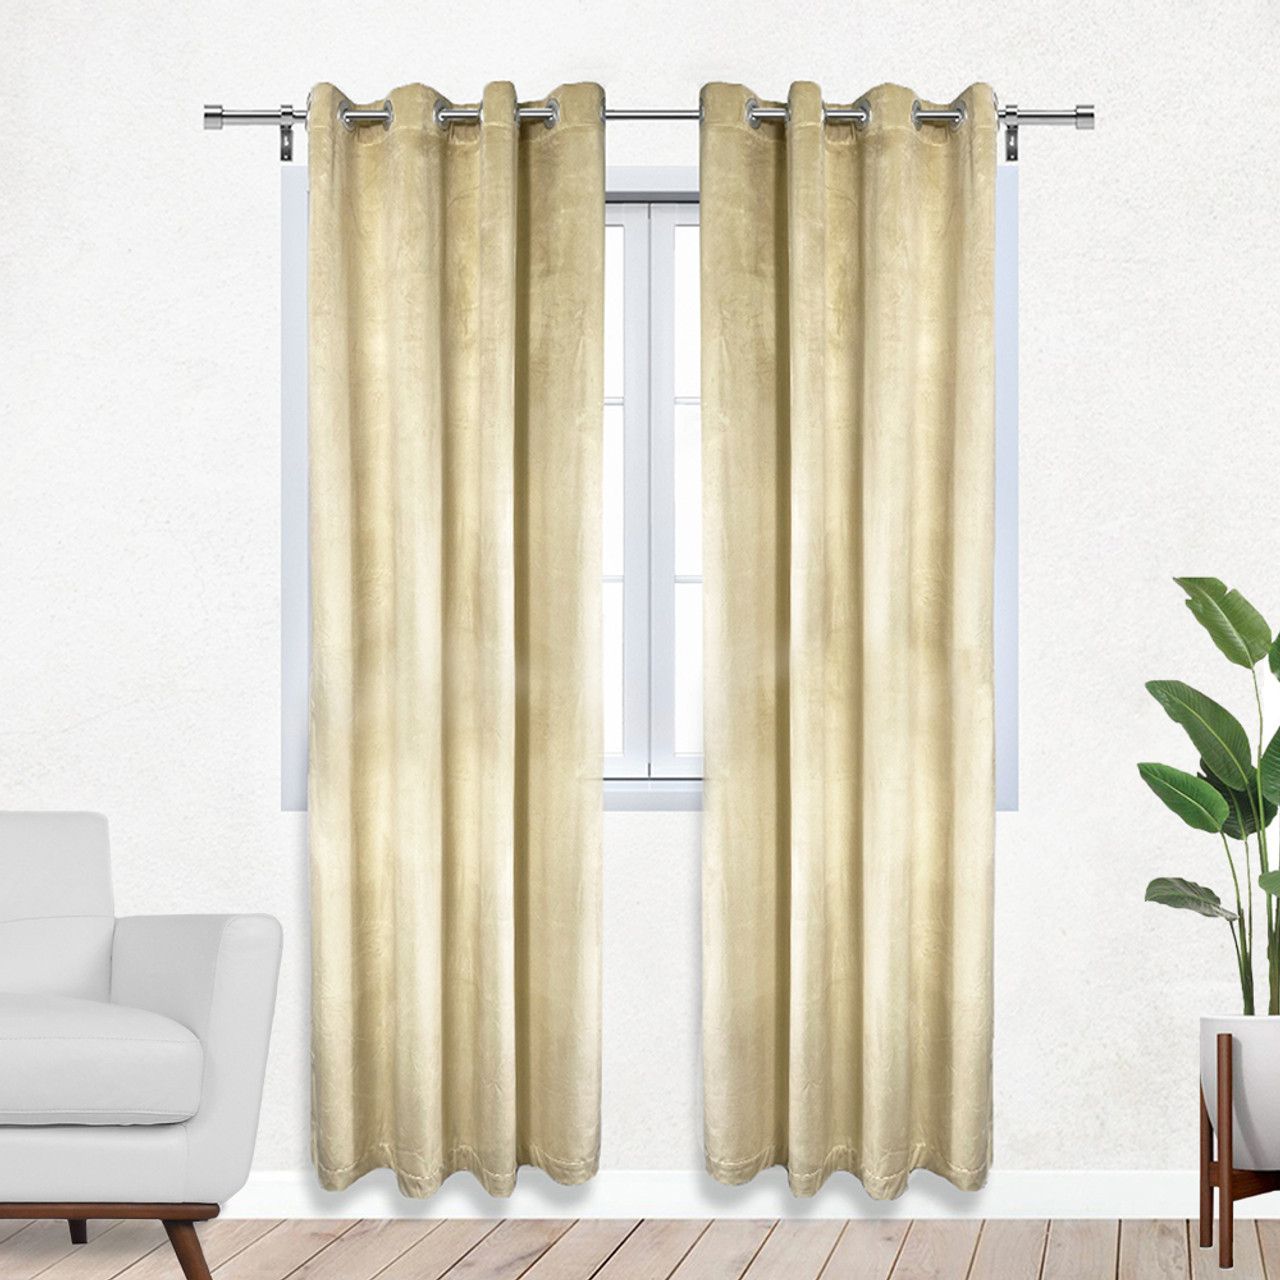 52 X 108 Inch Velvet Curtains with Grommets Beige - 2 Panels